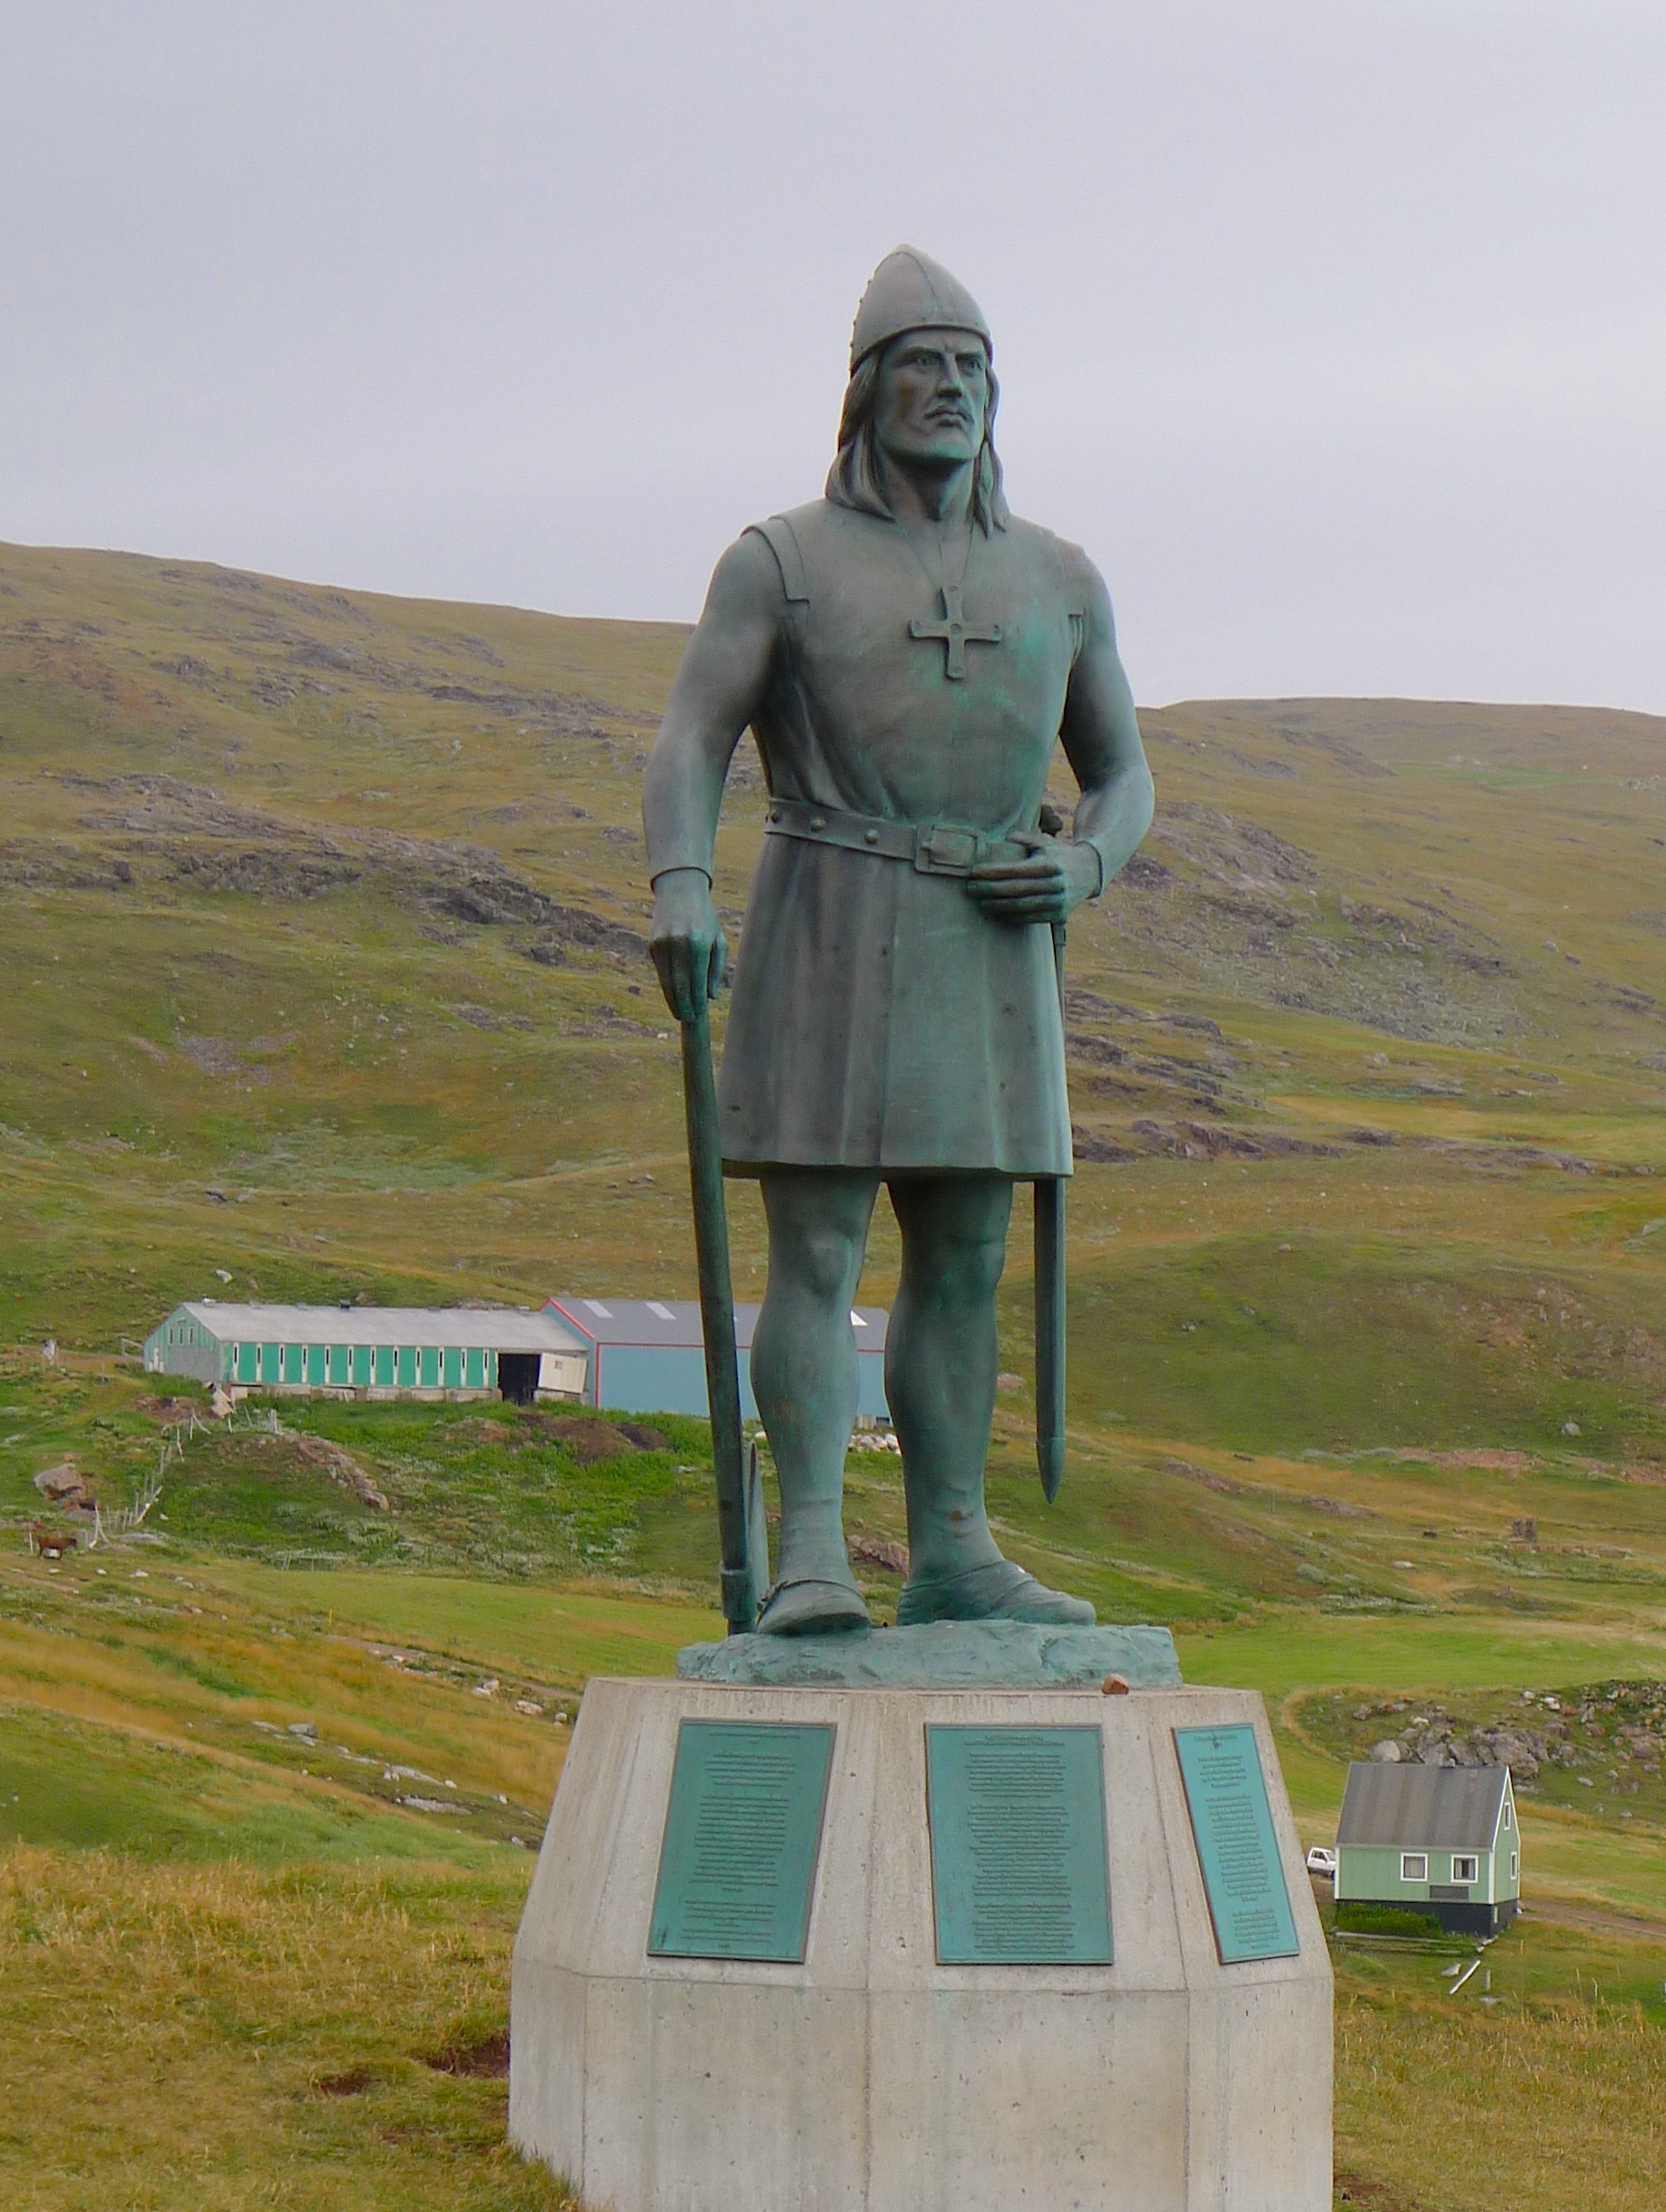 the Red Statue, Greenland (Illustration) - World Encyclopedia